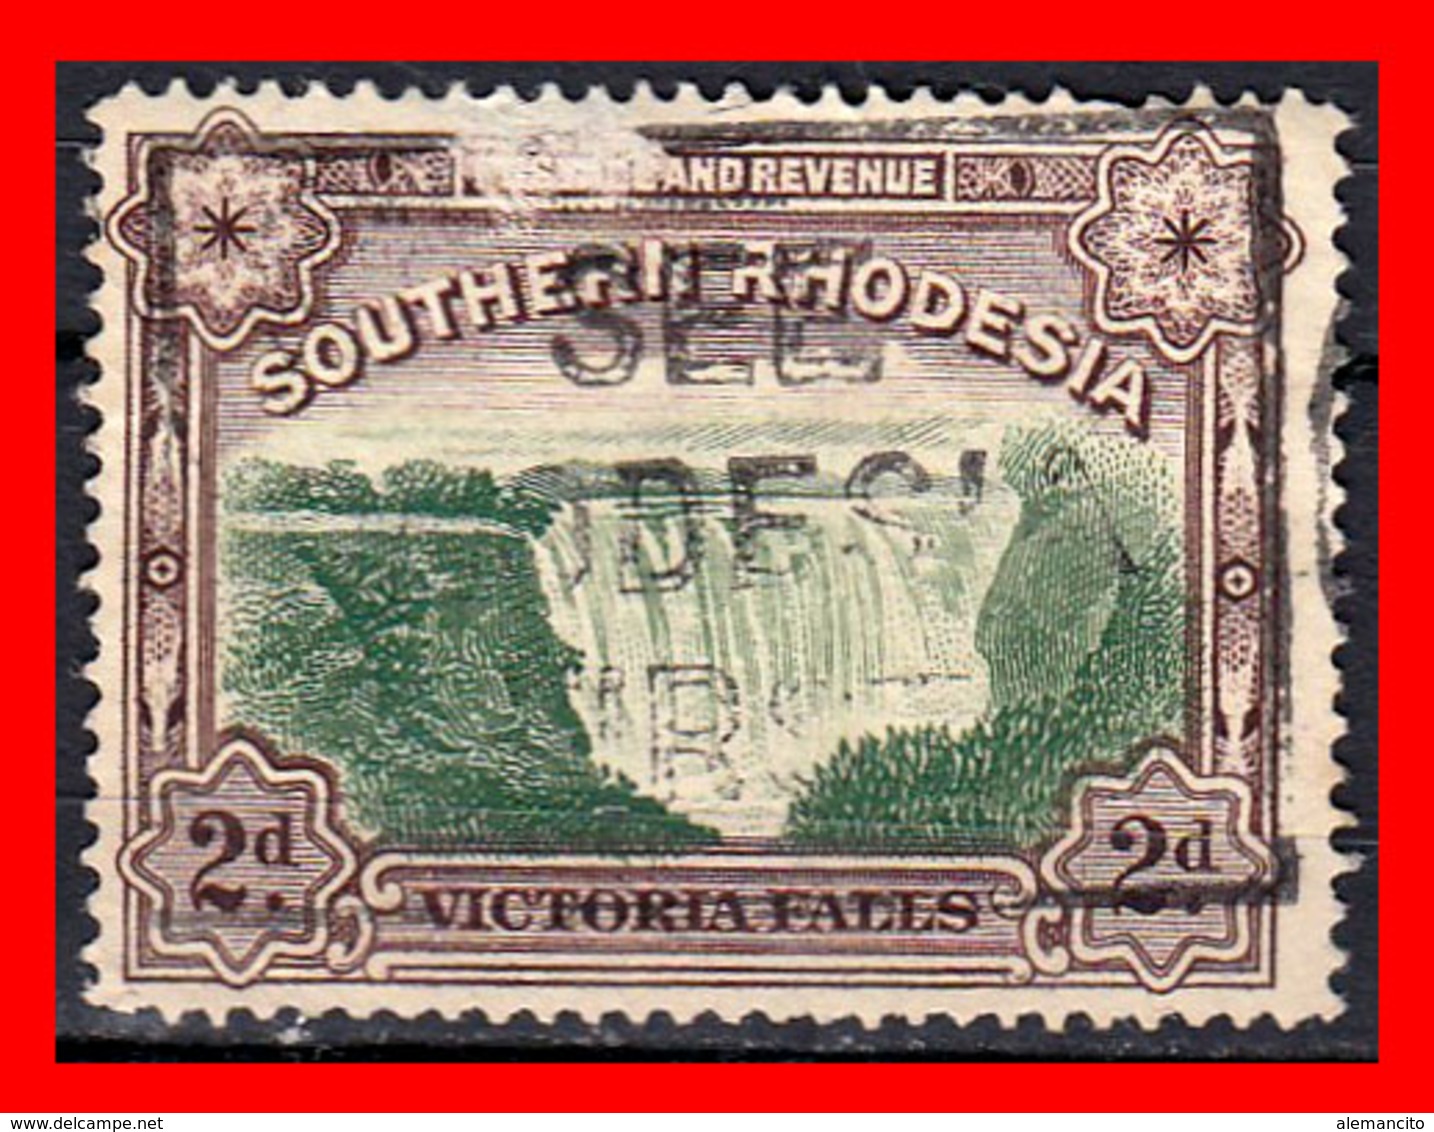 AFRICA../ SOUTHERN RHODESIA STAMP AÑO 1931-37 - Servizio